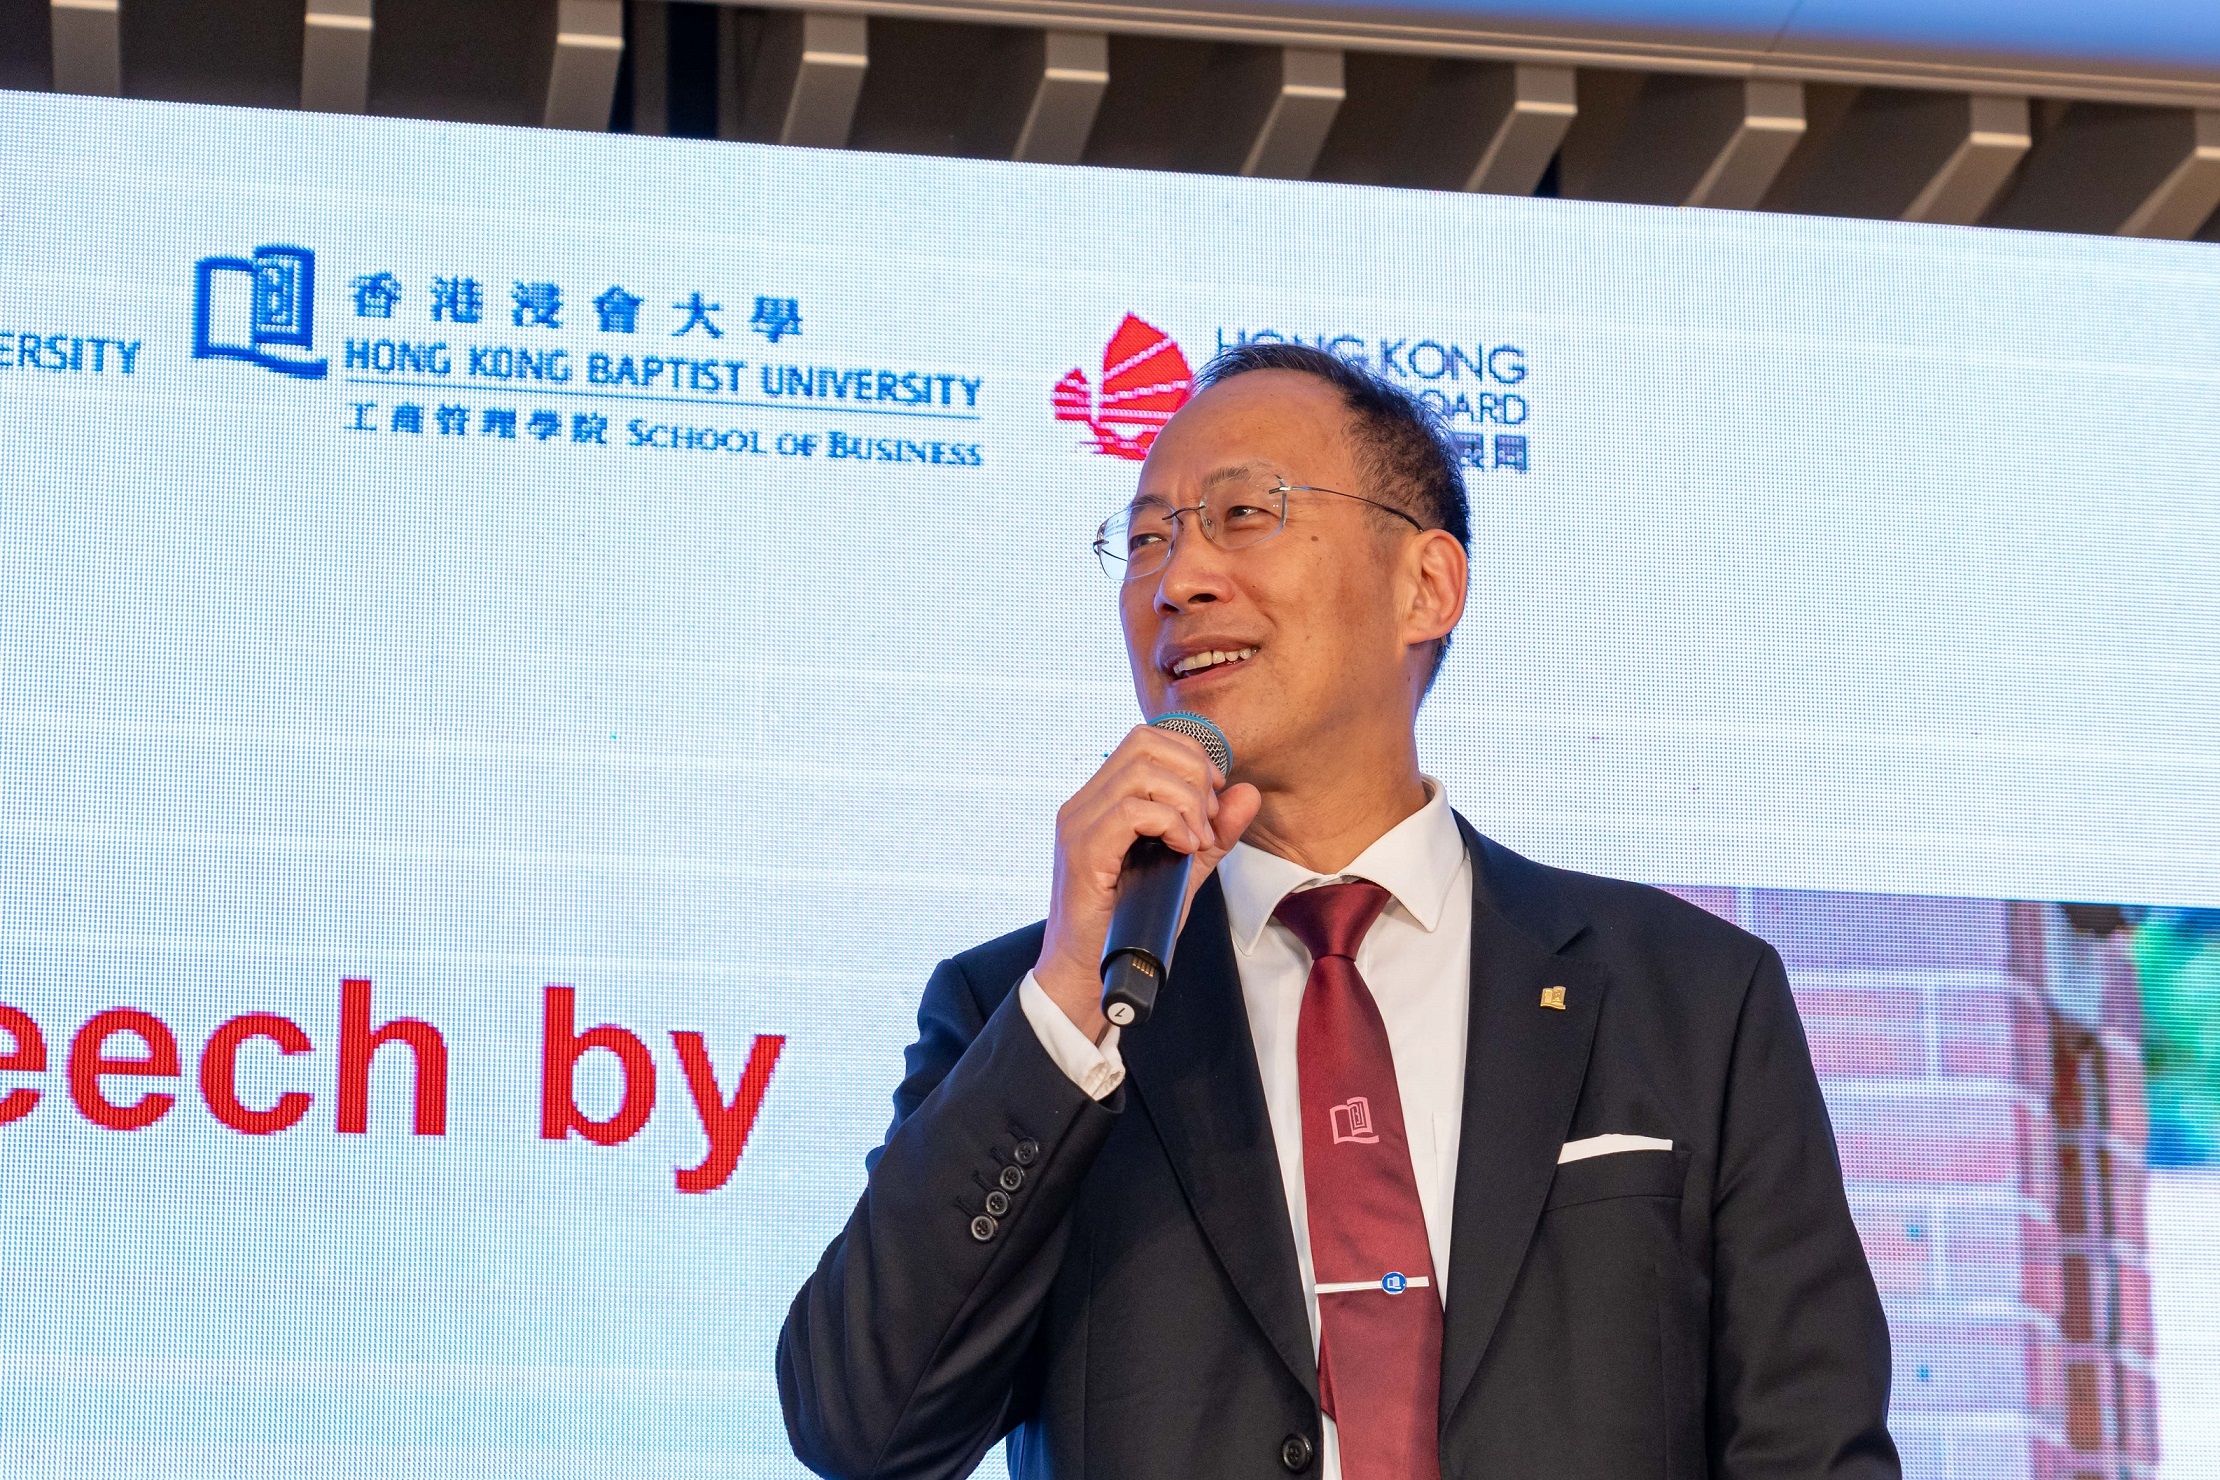 Professor Alexander Wai, President and Vice-Chancellor of HKBU said that the Conference offers an ideal platform to discuss higher educations models and practices in the fields of business and management.